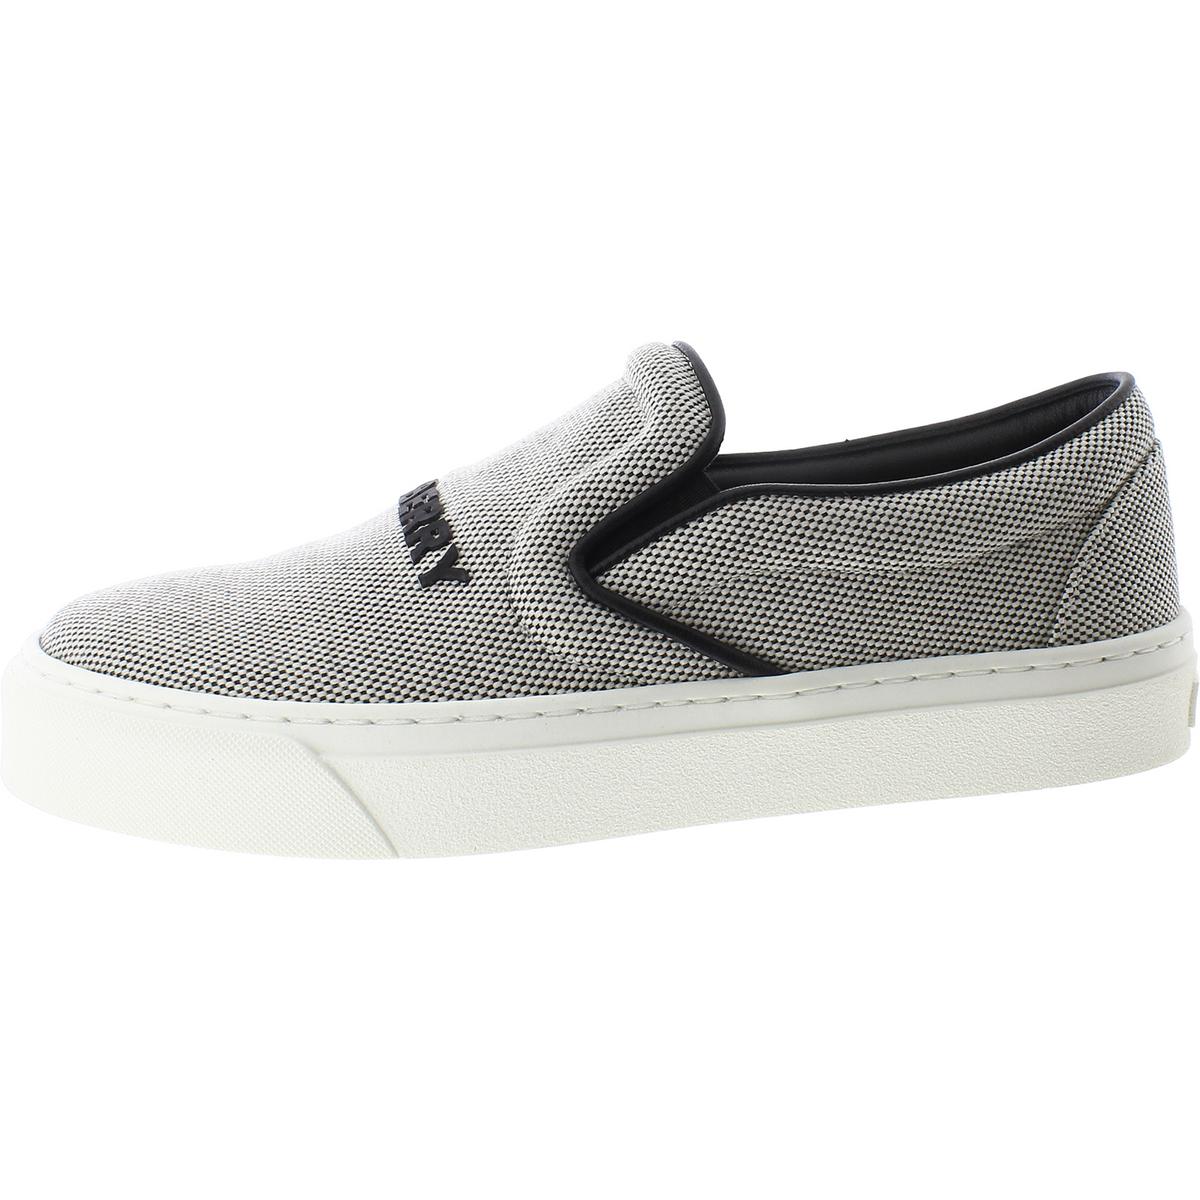 Burberry Womens Fashion Lifestyle Slip-On Sneakers